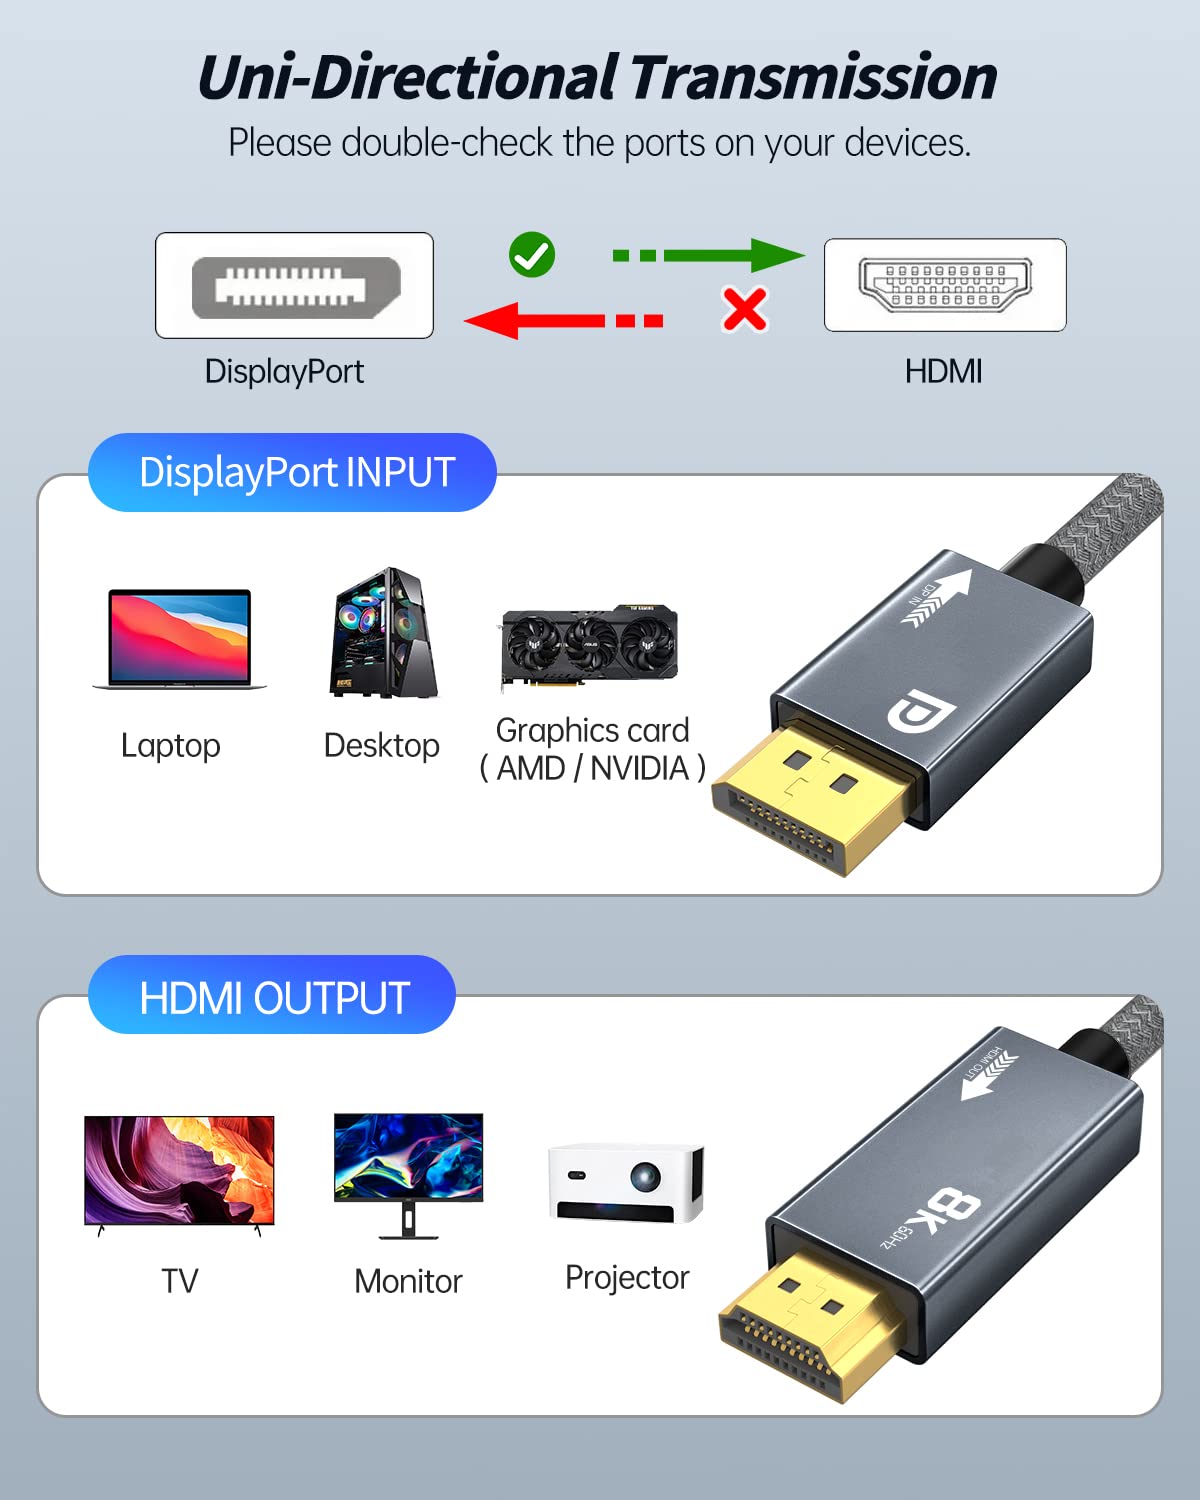 AGFINEST 8K DisplayPort to HDMI Cable[8K@60Hz,4K@120Hz,2K@165Hz], 10FT Unidirectional DP 1.4 to HDMI 2.1 Video Cable, Support HDR/HDCP 2.3/DSC 1.2 for PC, HP, DELL, AMD NVIDIA Graphics Card and More